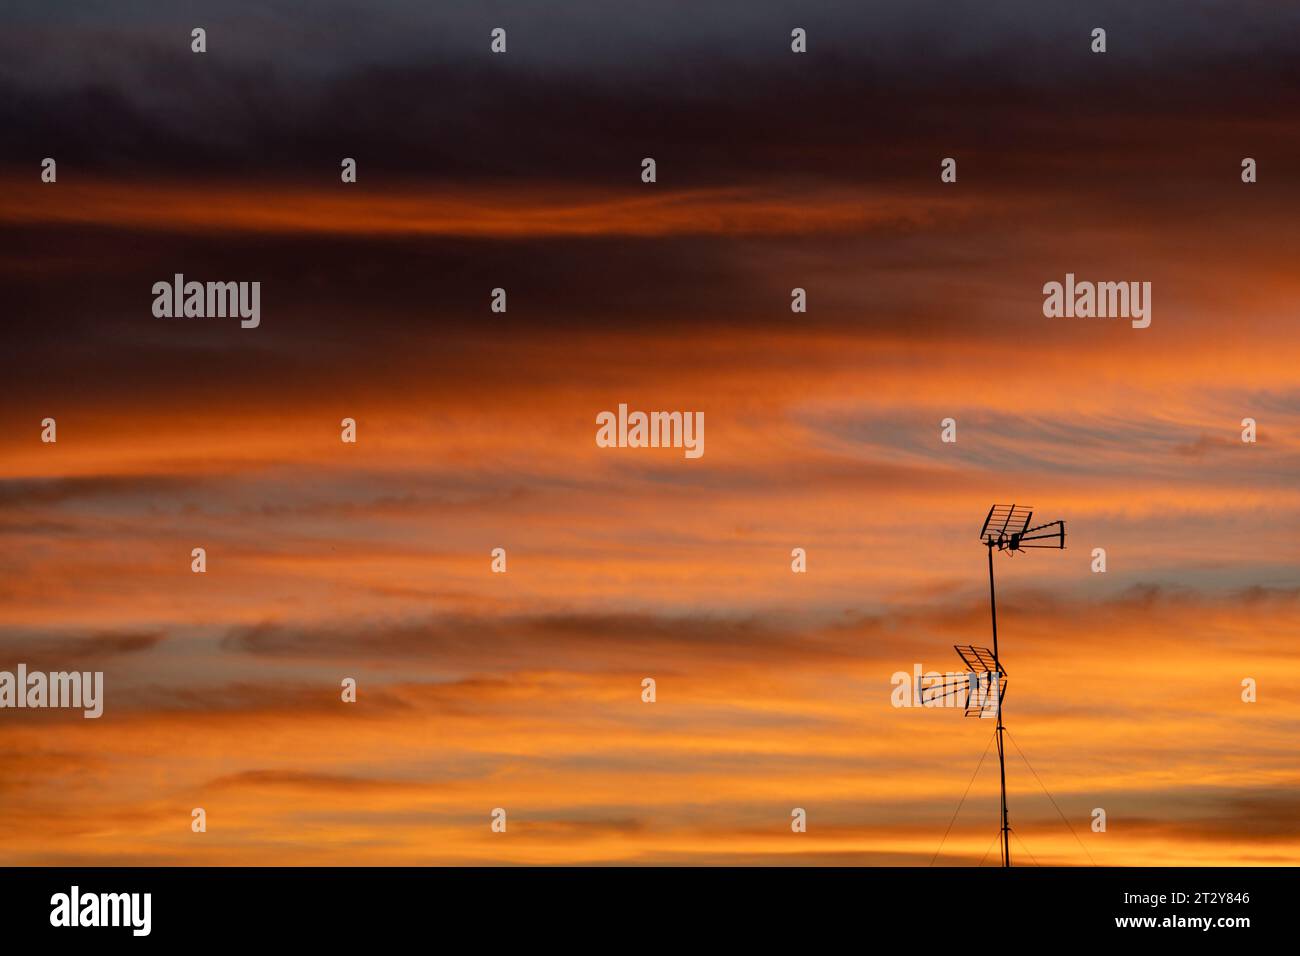 a sunset cloudscape image filled with golden clouds and a single television antenna silhouette. Stock Photo